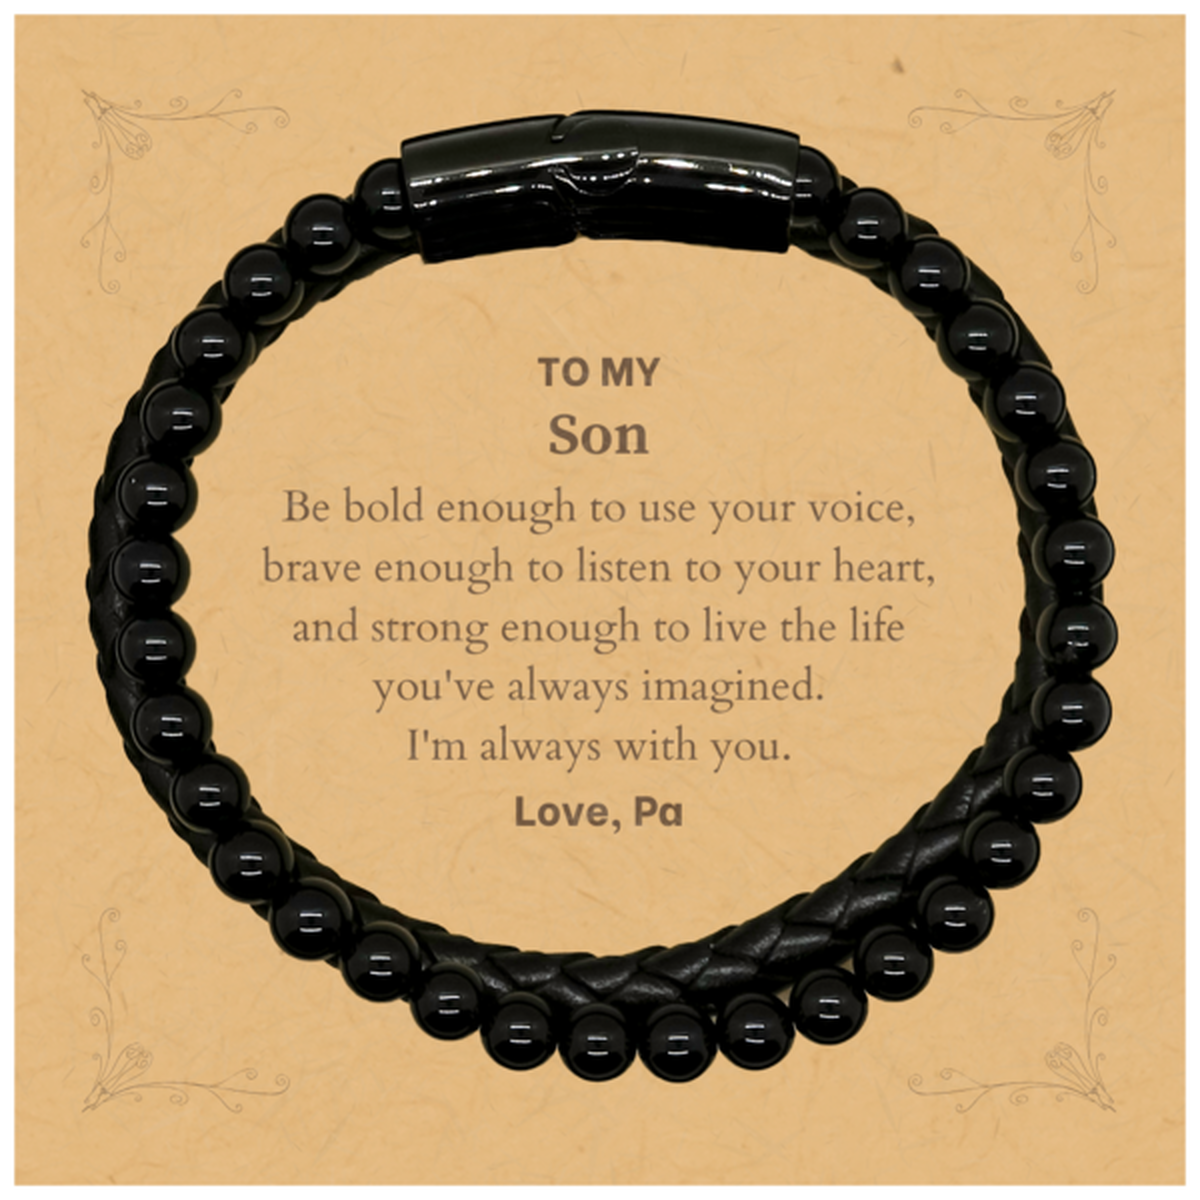 Keepsake Son Stone Leather Bracelets Gift Idea Graduation Christmas Birthday Son from Pa, Son Be bold enough to use your voice, brave enough to listen to your heart. Love, Pa